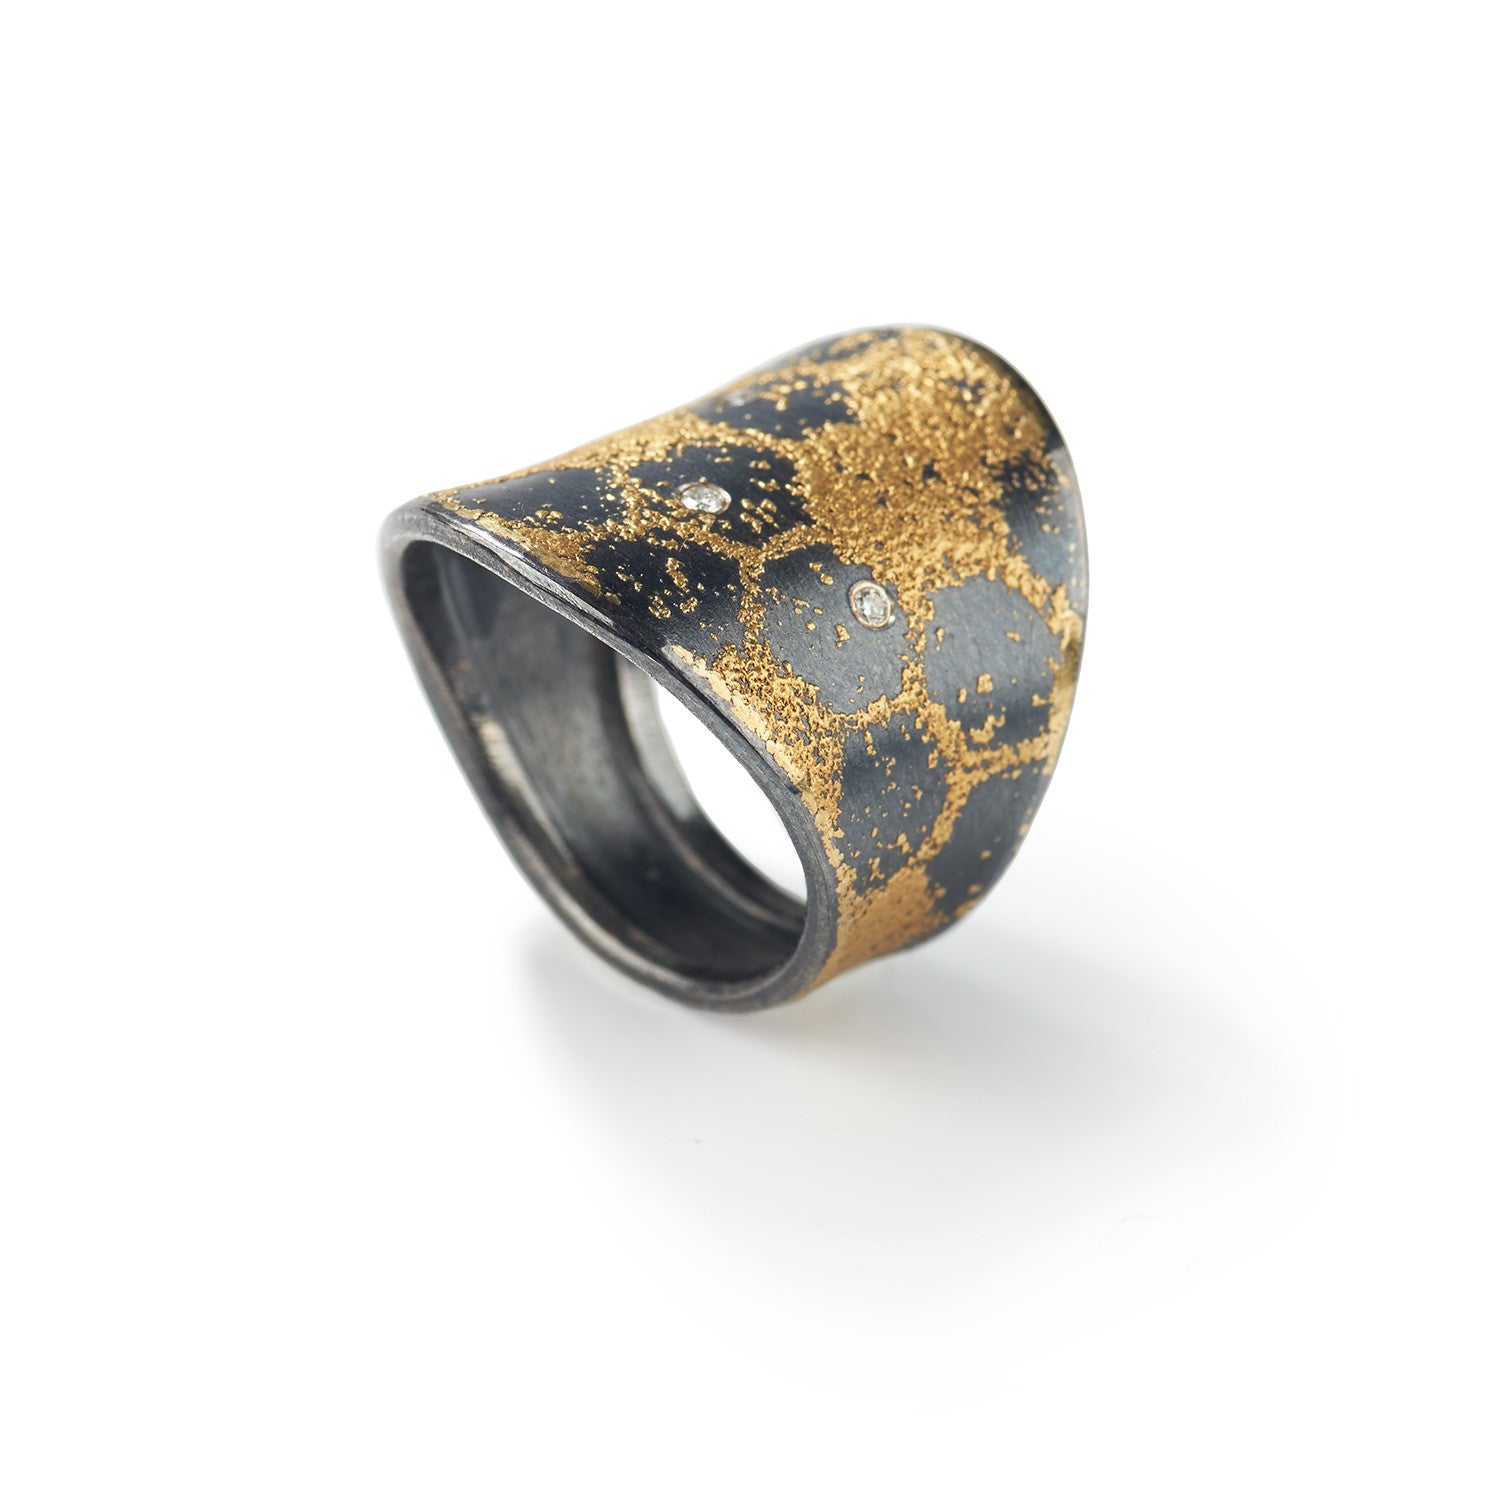 Honeycomb Patterned Ring